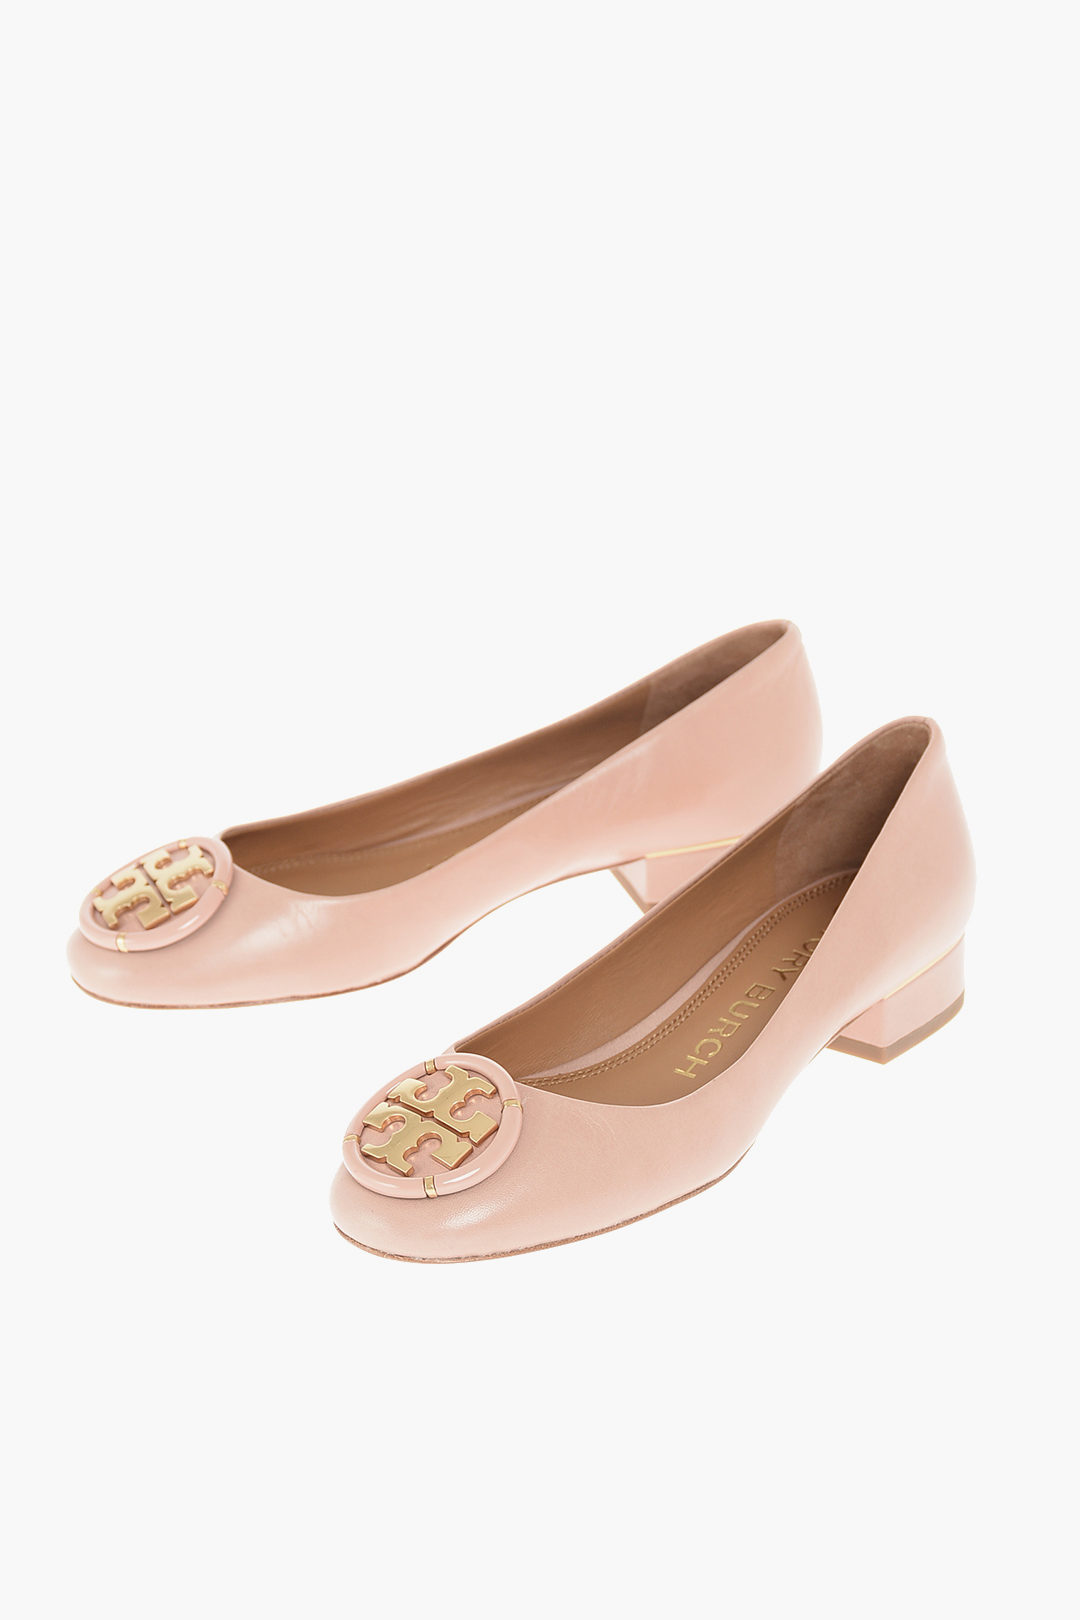 Tory Burch Front Logo Textured Leather Ballet Flats  women - Glamood  Outlet